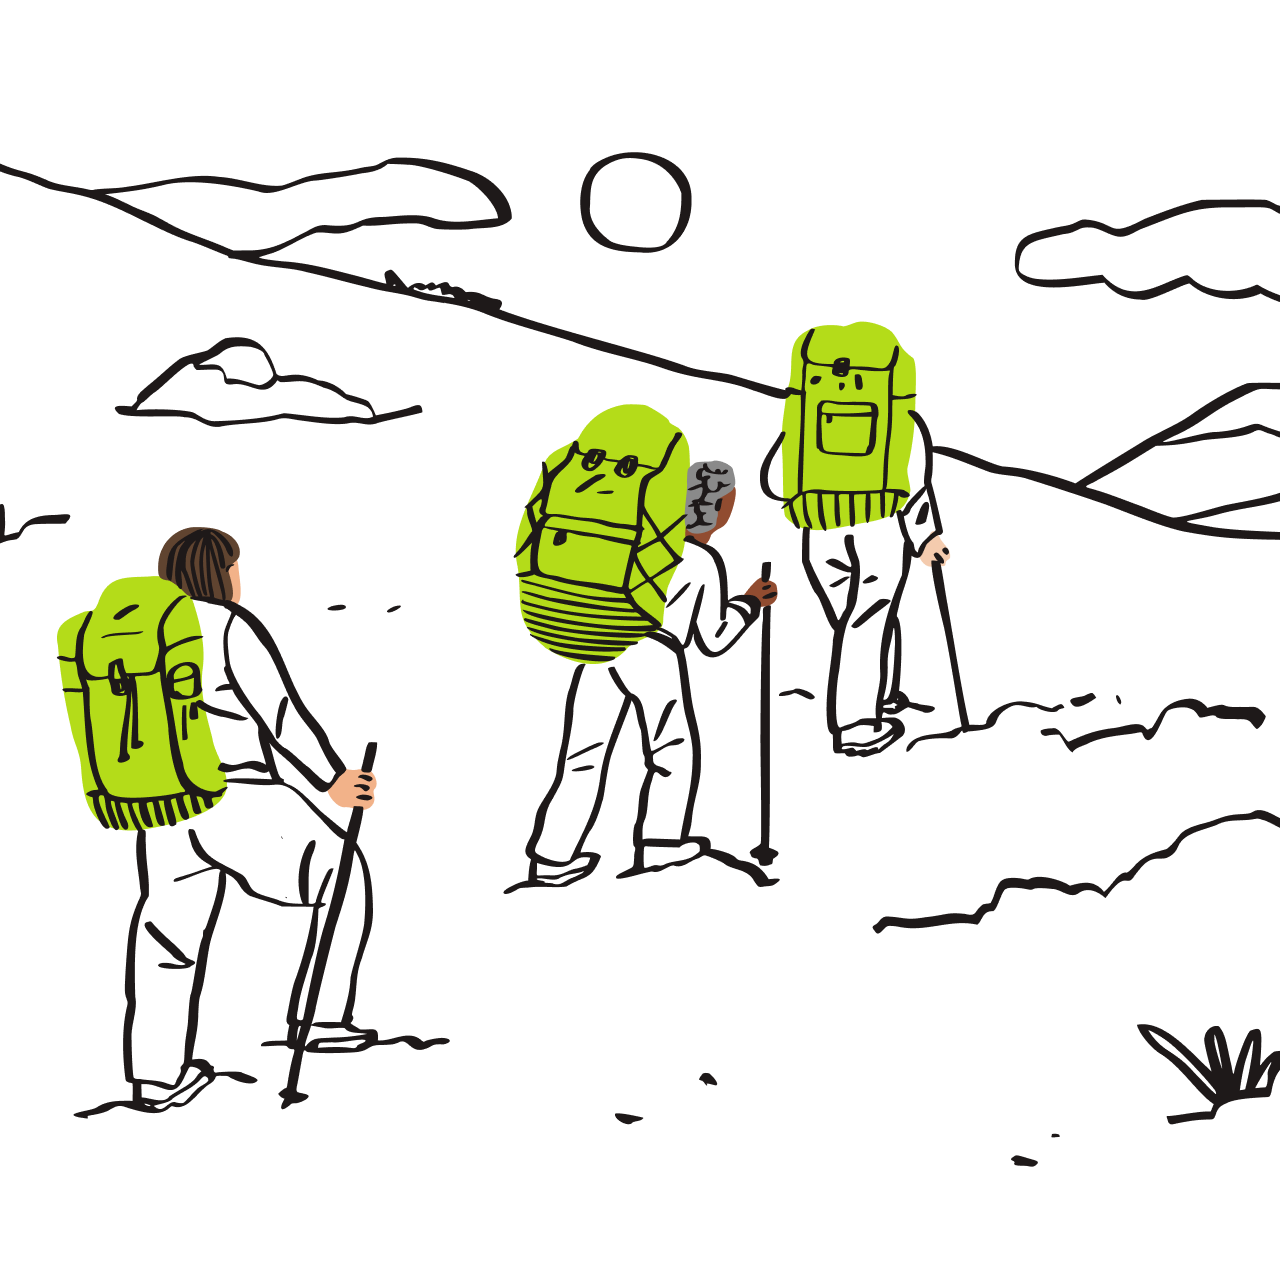 An illustration of three backpackers on a hike.